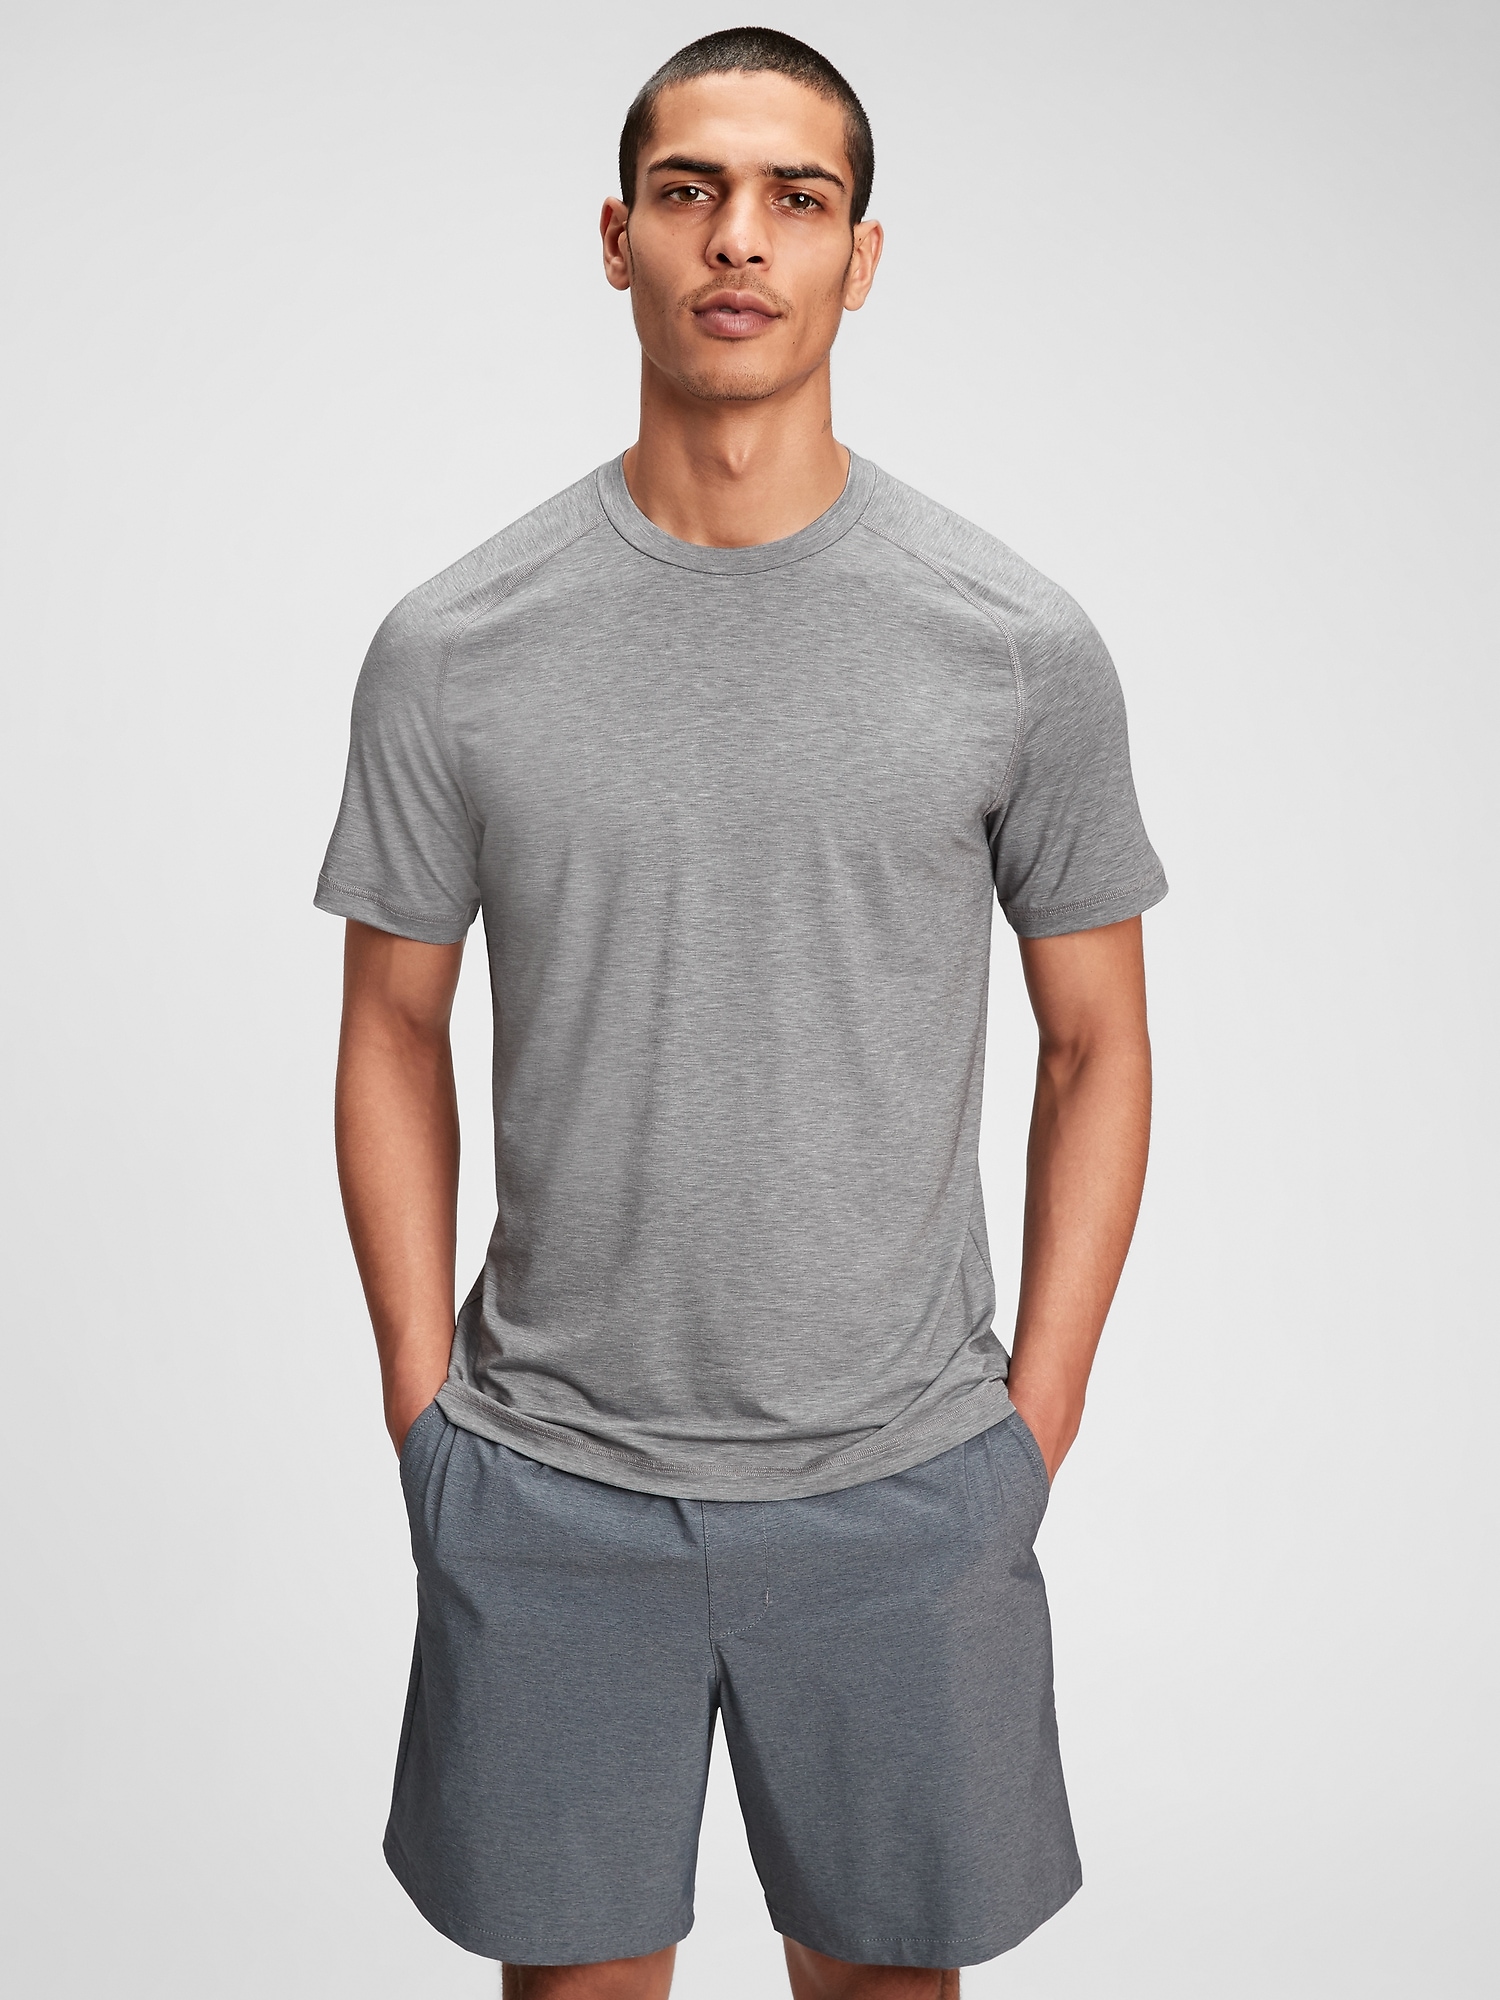 Gap Fit Recycled Active T-shirt In Medium Heather Gray